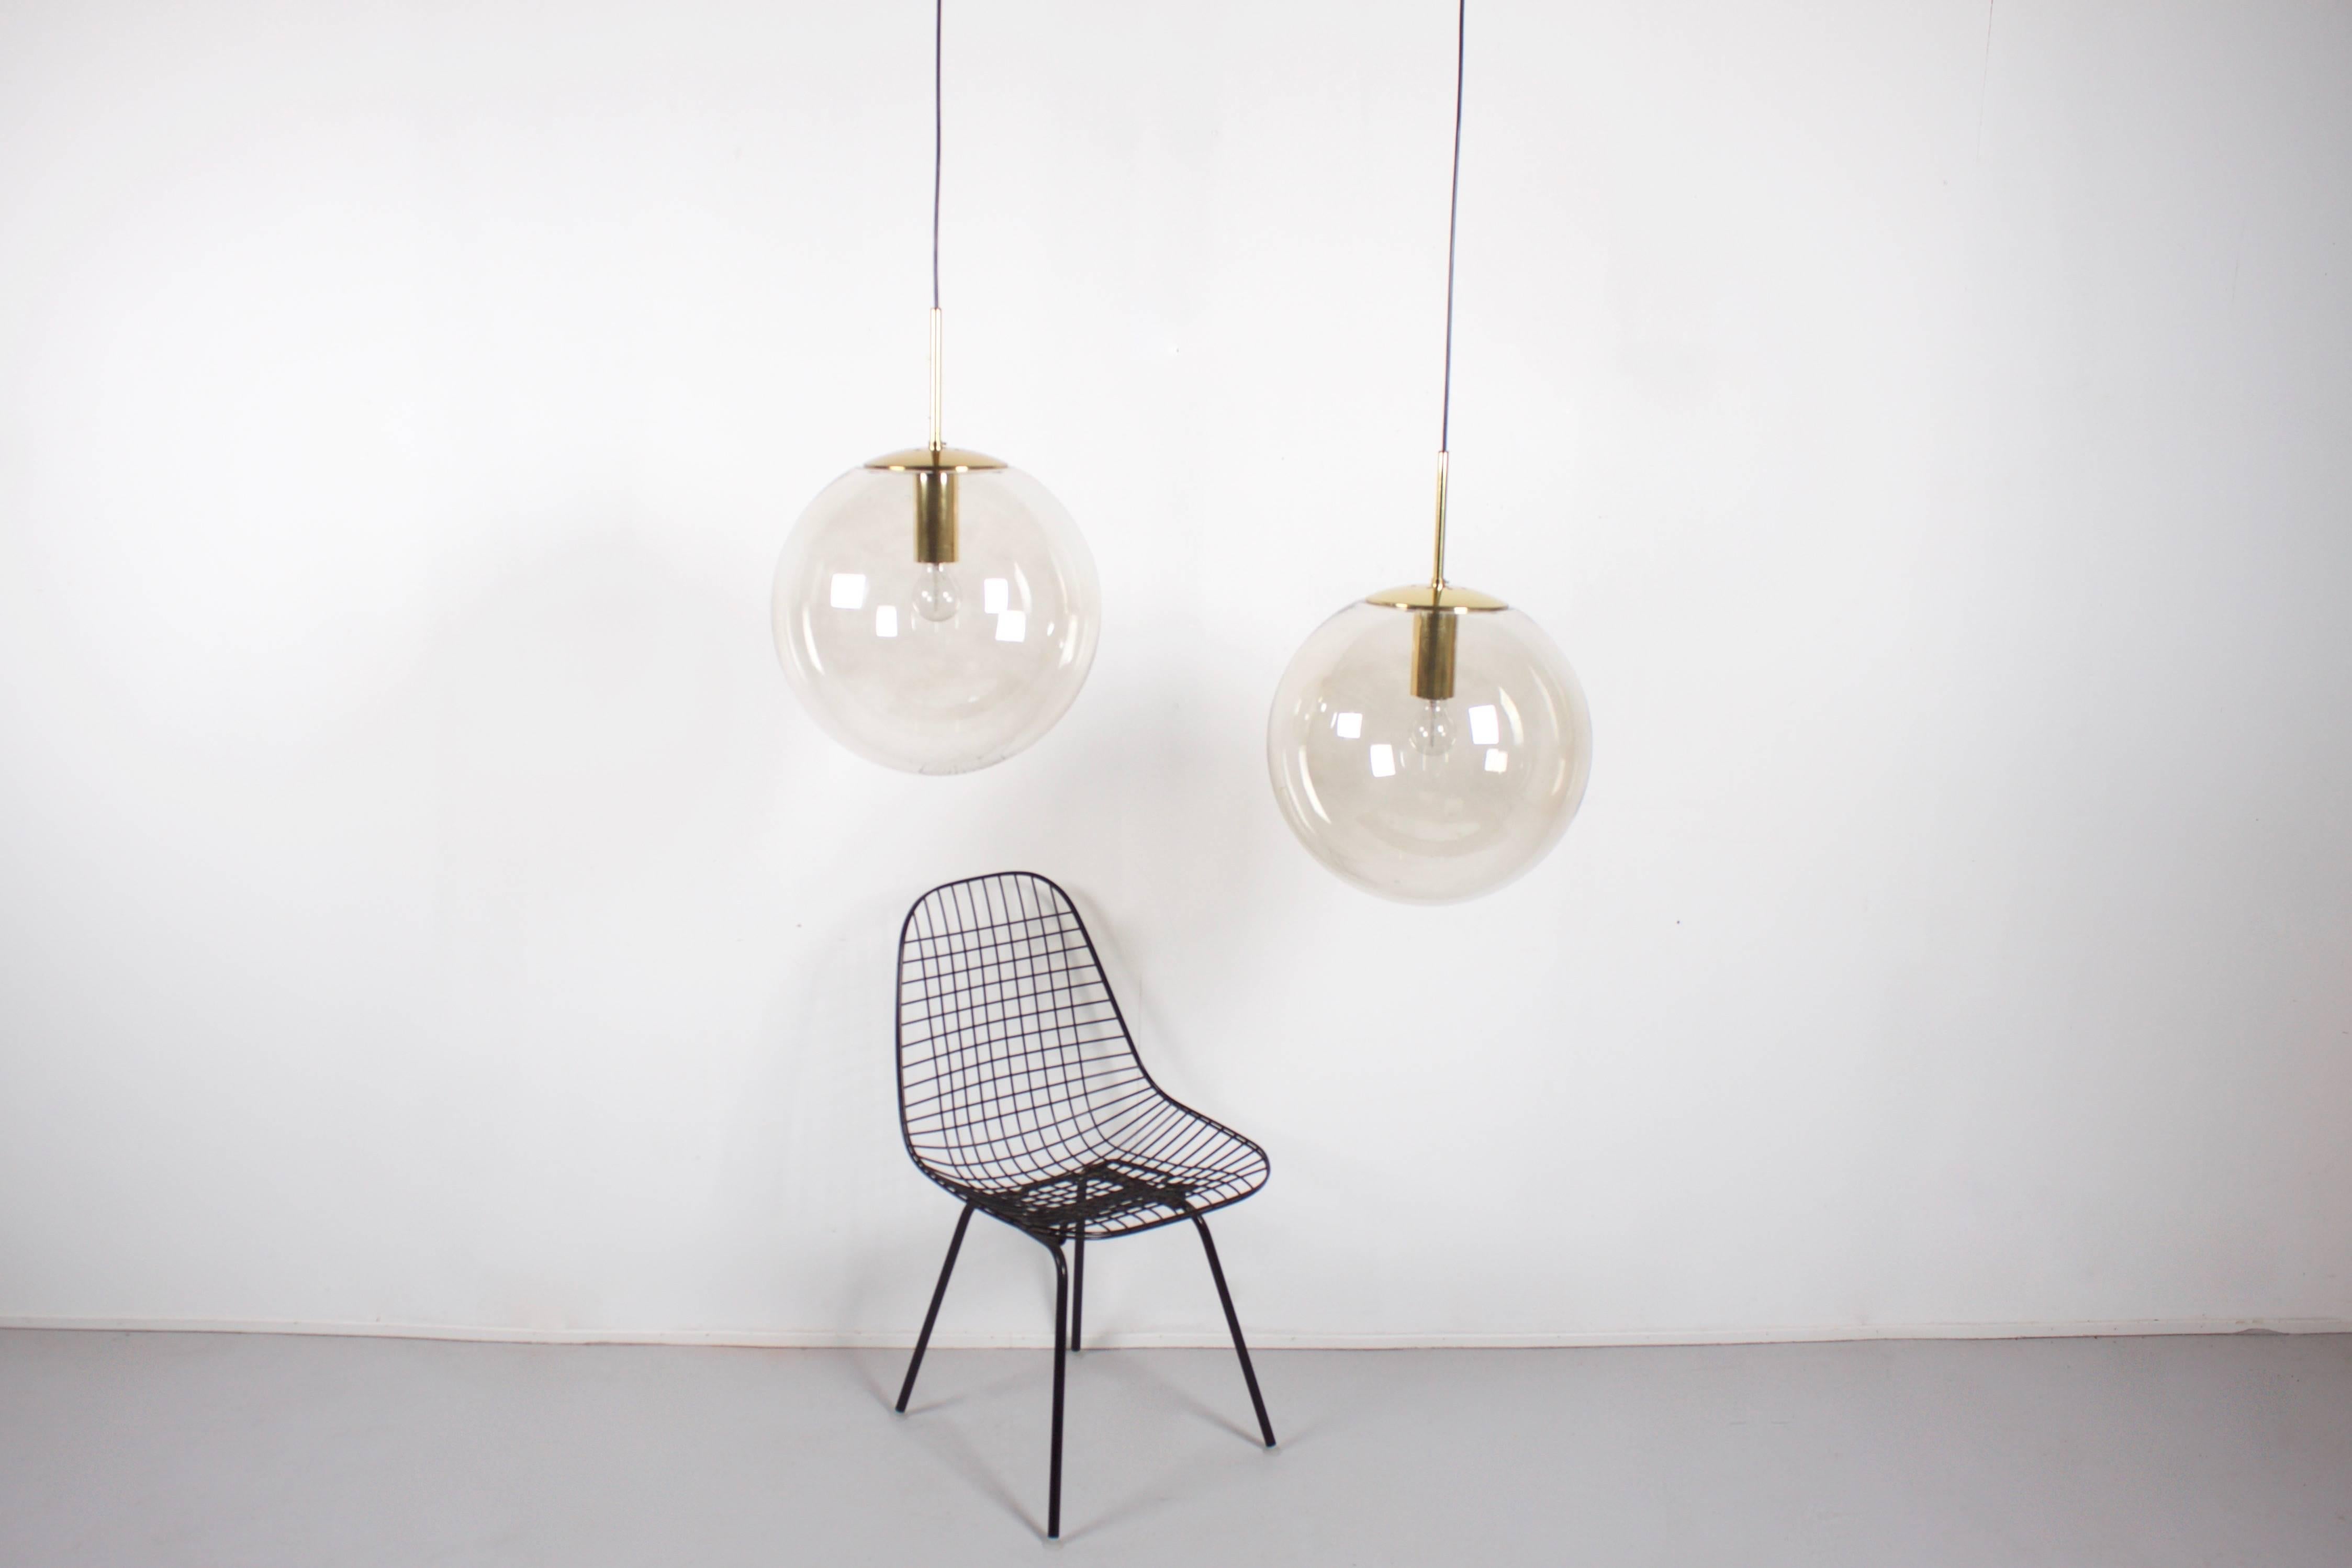 Large Glashütte Limburg pendants in beautiful condition. 

Brass hardware. 

Handblown clear glass globes which give a warm light effect, 40 cm. in diameter 

Black cord and canopy. 

The length of the cord can be customized for free.